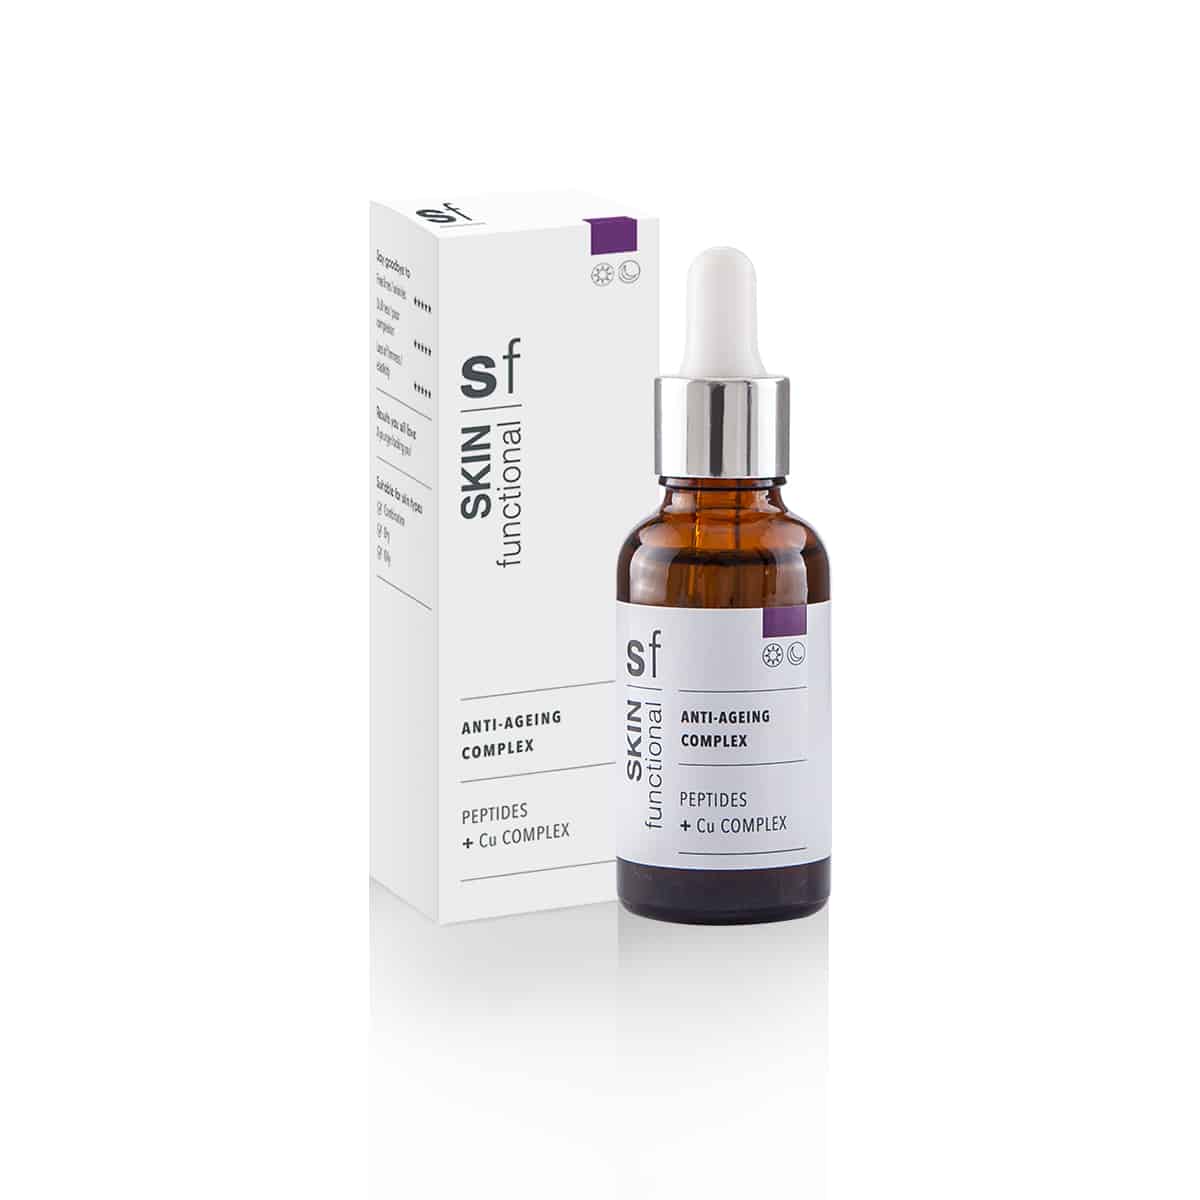 A bottle of SKIN Functional - Peptides + Cu Complex - Anti Ageing Complex serum on a white background.